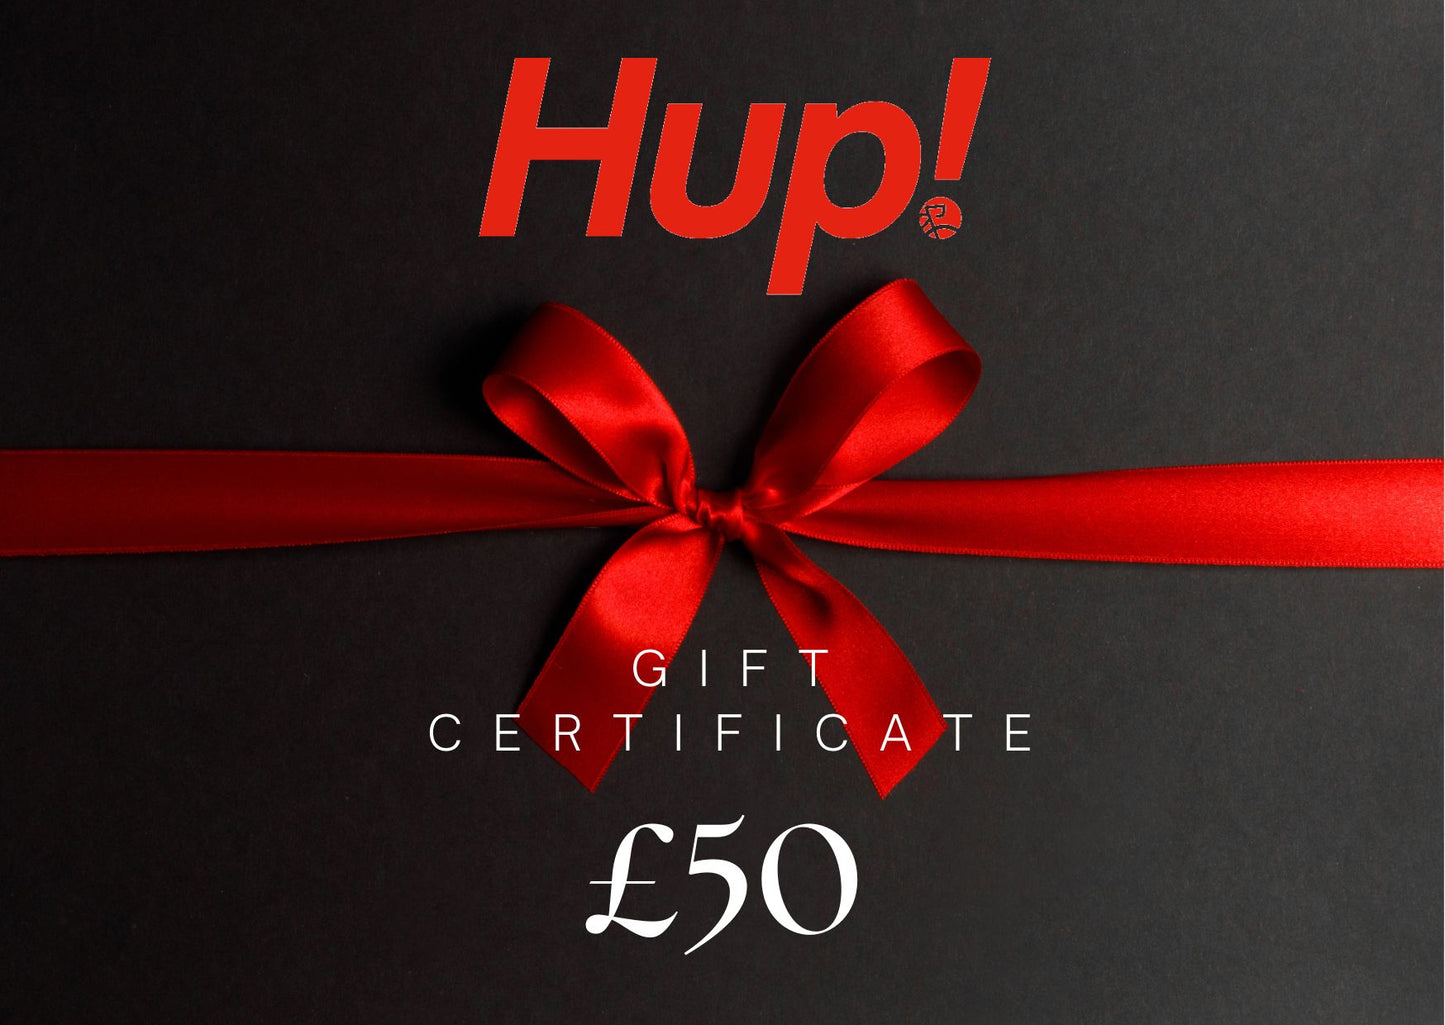 HUP! Cafe discount gift card - The more you spend the more you save!